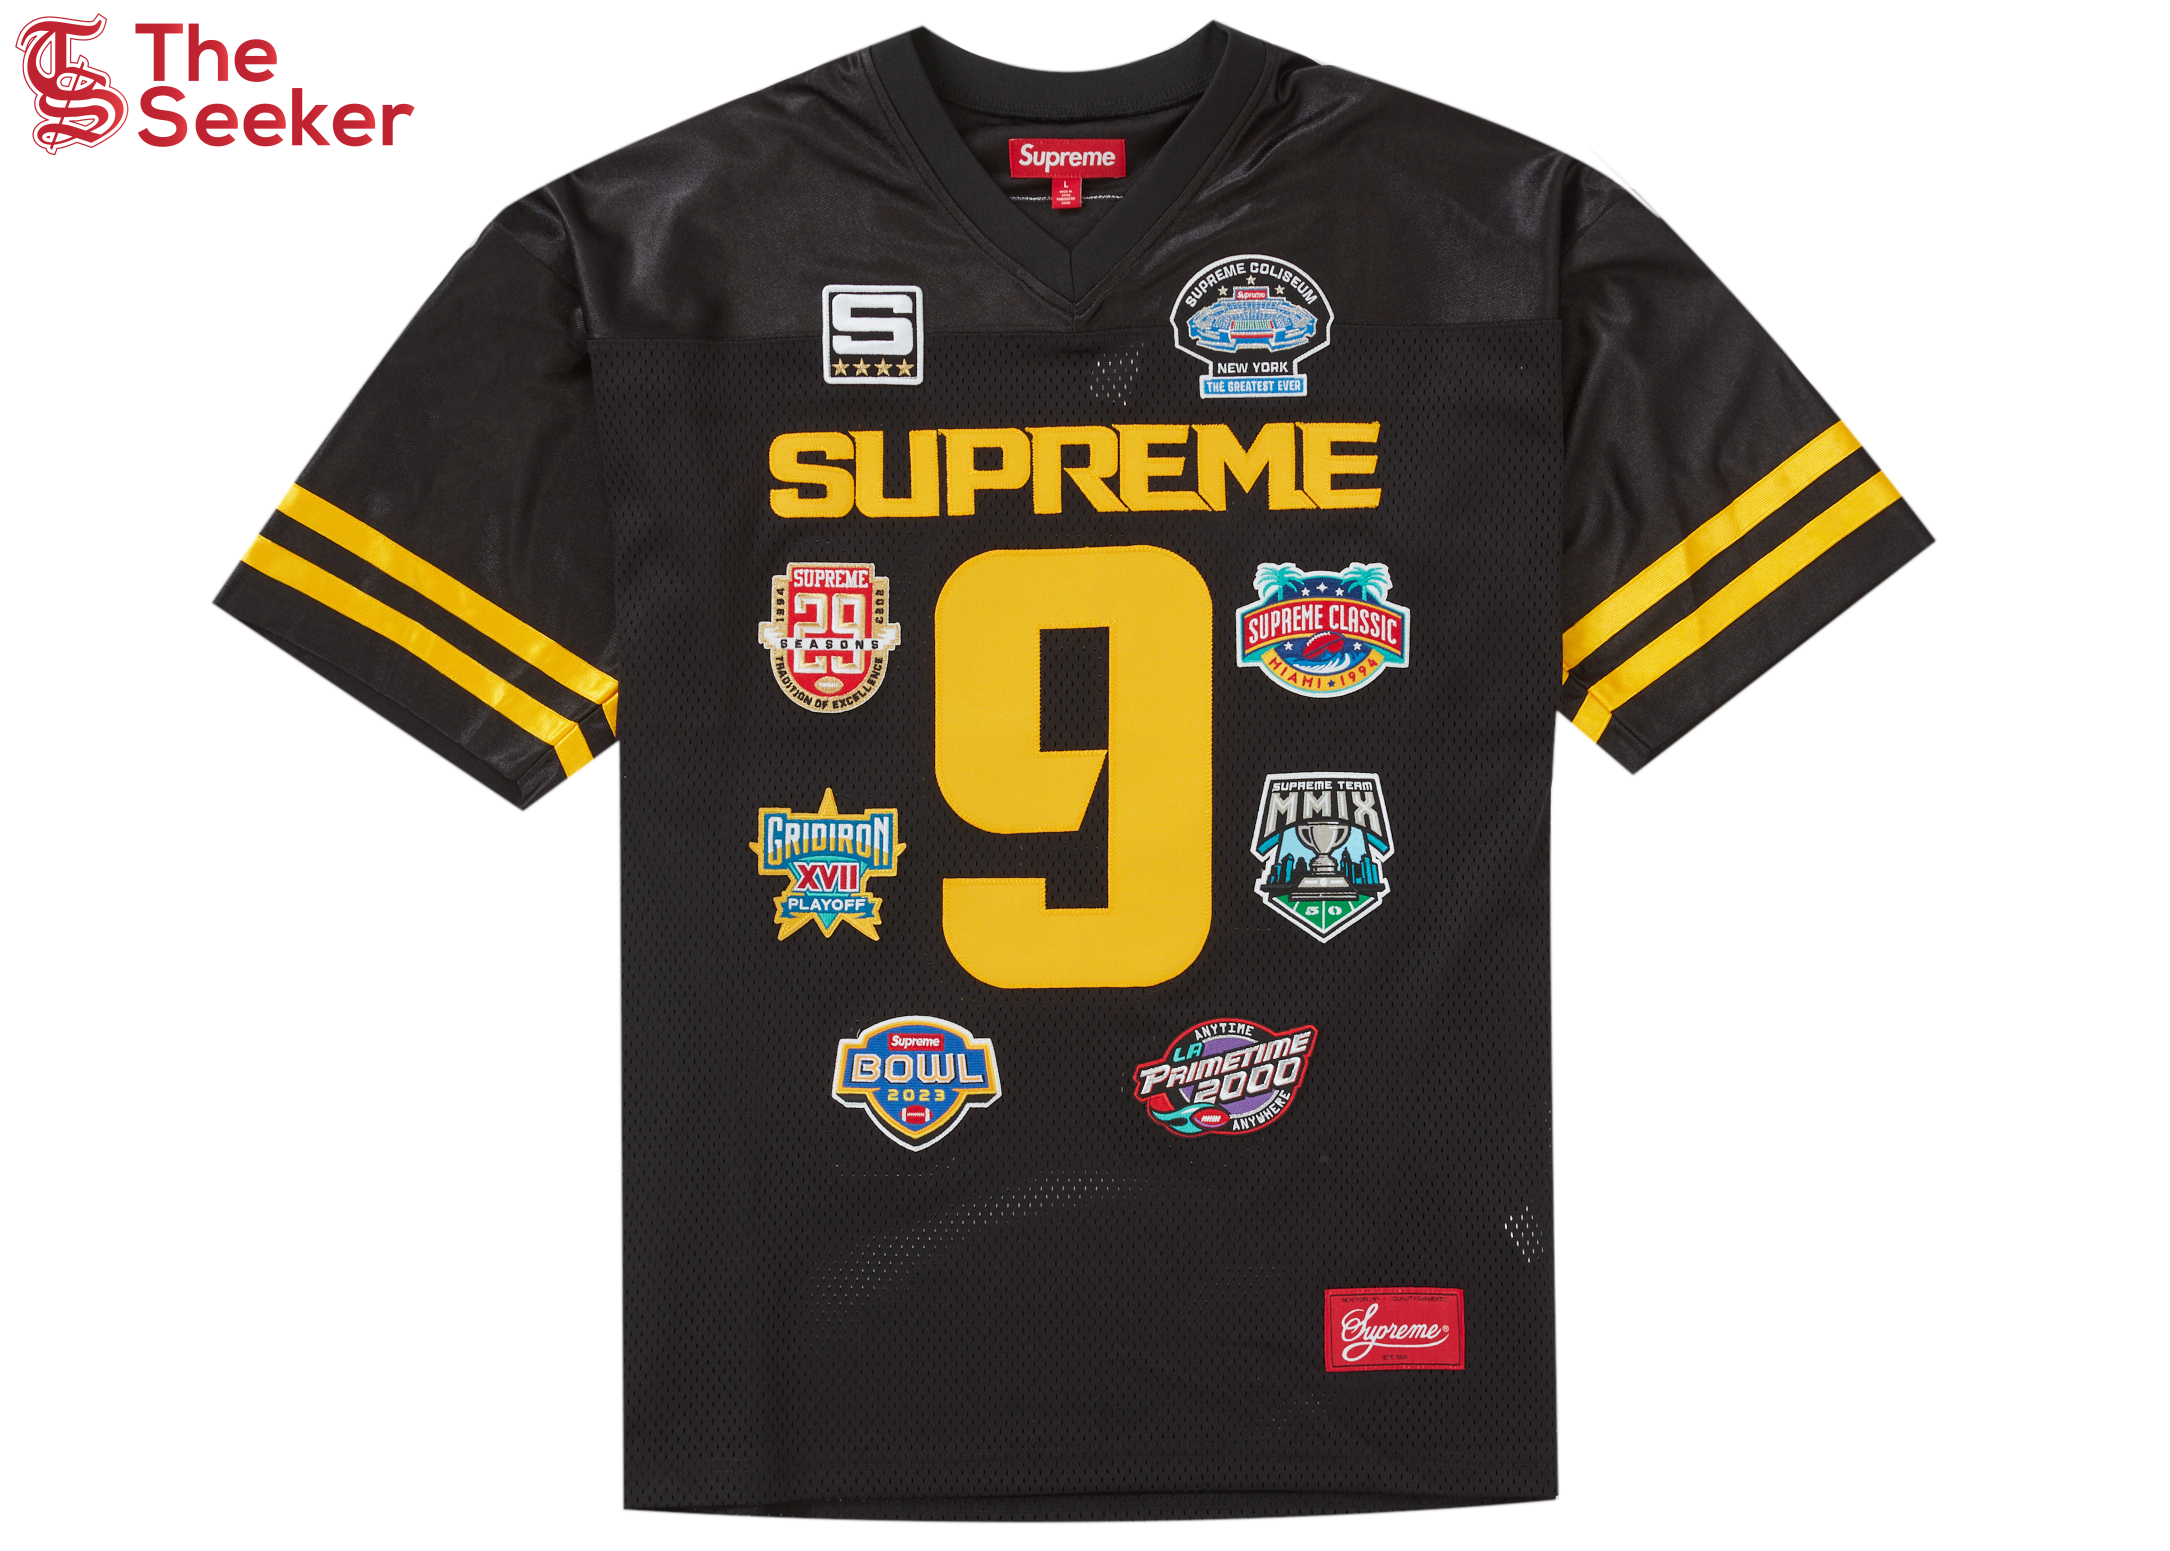 Supreme Championships Embroidered Football Jersey Black